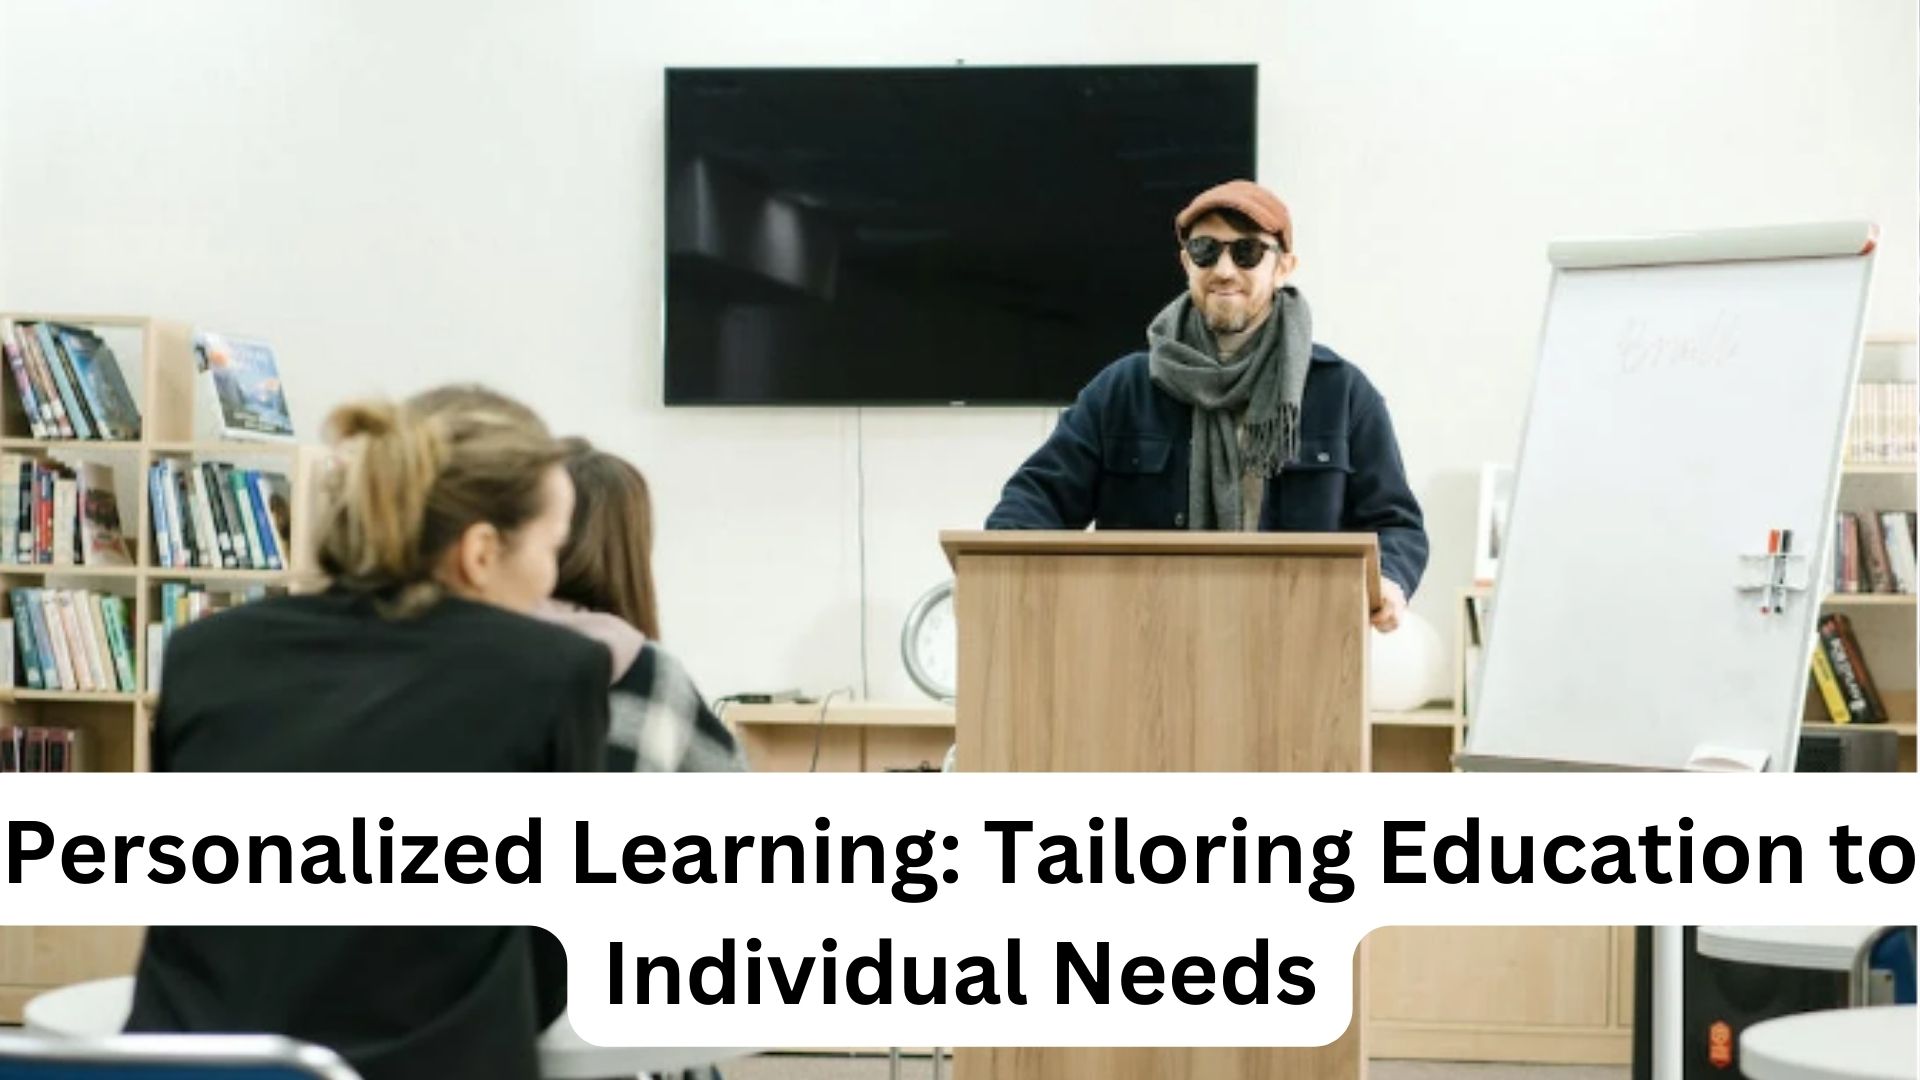 Personalized Learning: Tailoring Education to Individual Needs